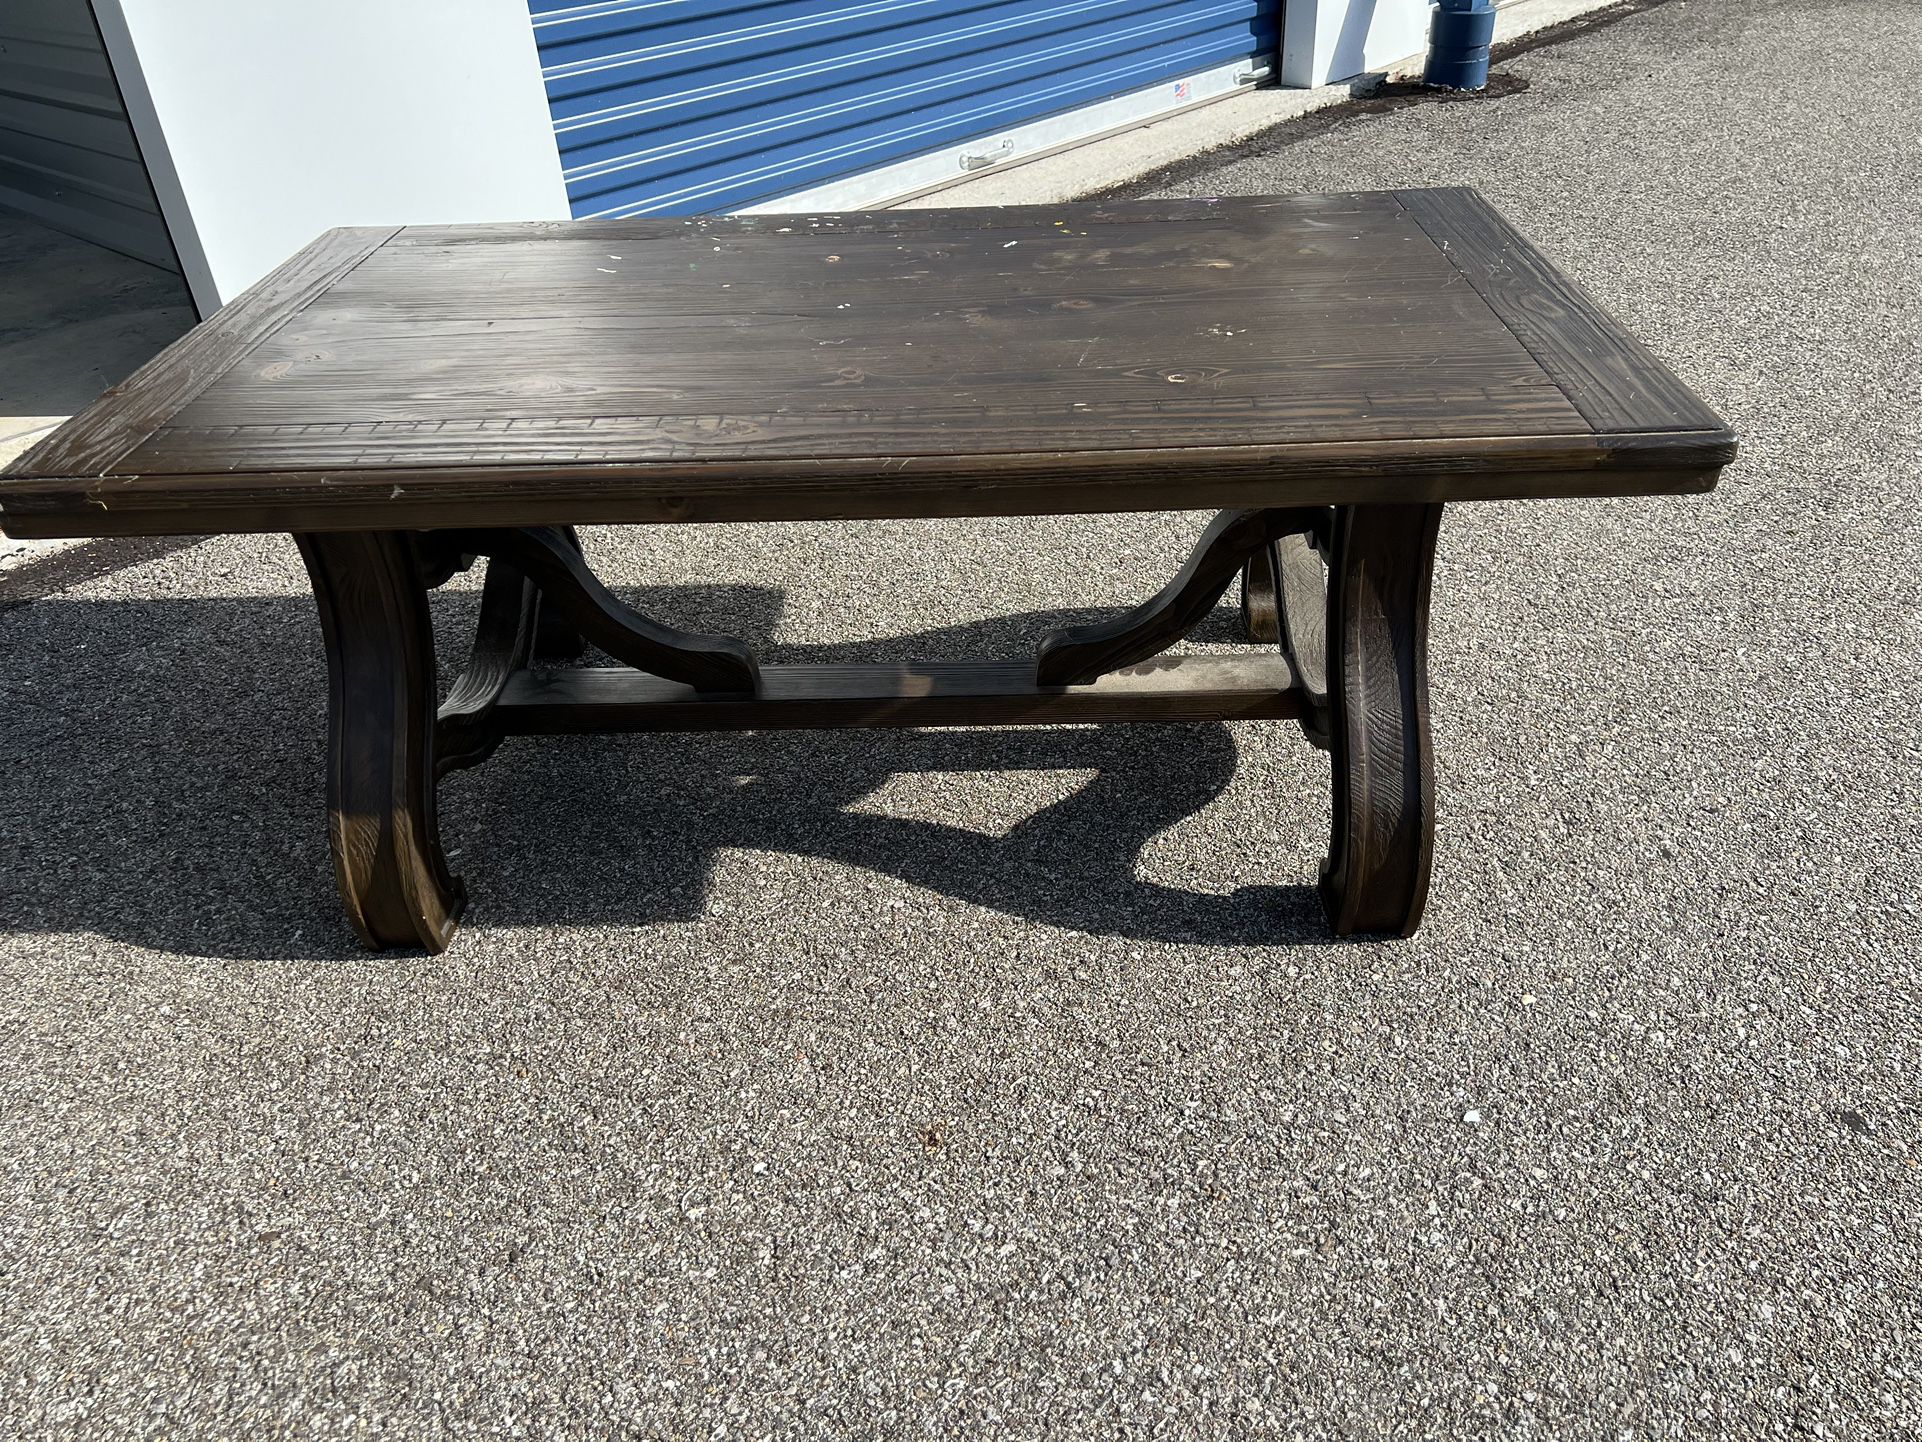 Wooden Coffee Table/Kids Art Table. Needs painted or refinishing  48” long  26” deep  19” tall 